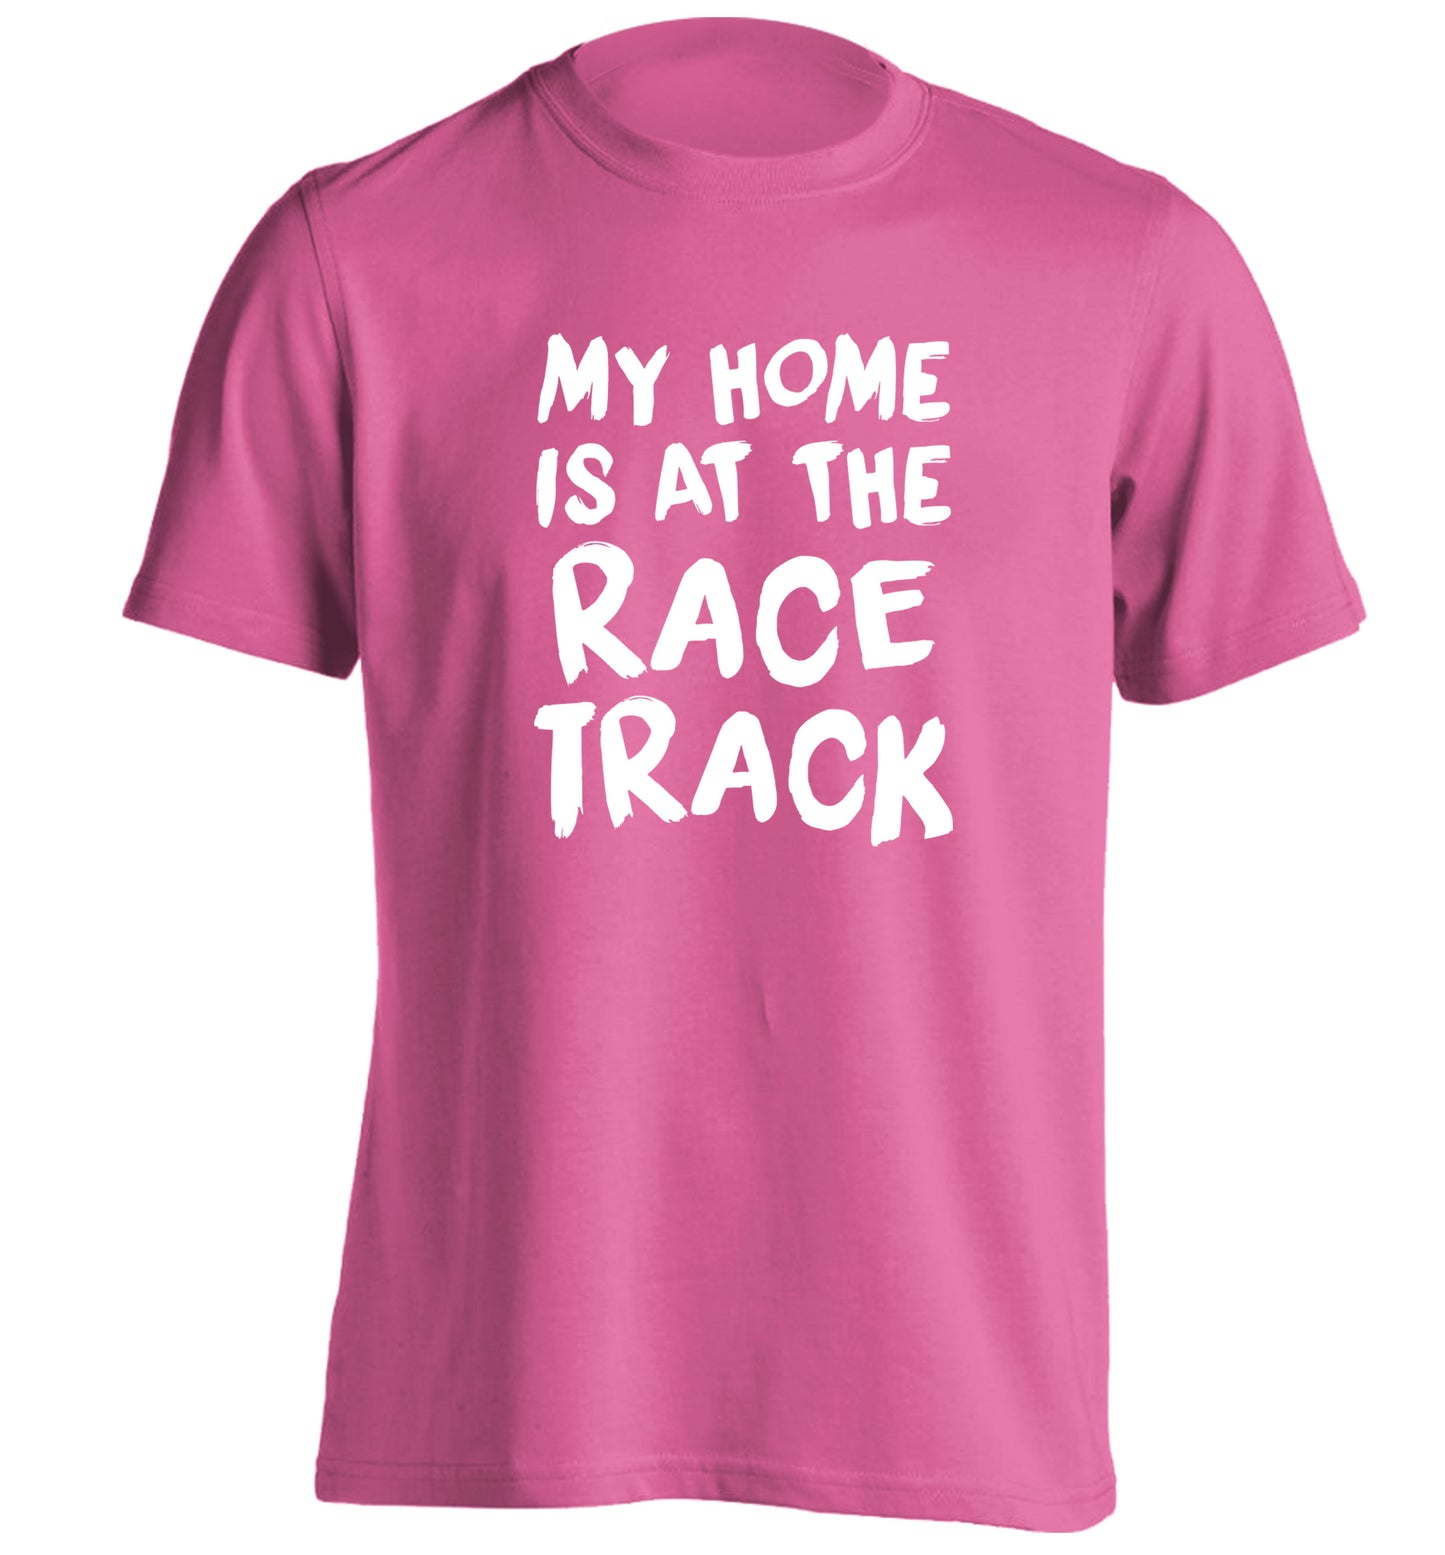 My home is at the race track adults unisex pink Tshirt 2XL